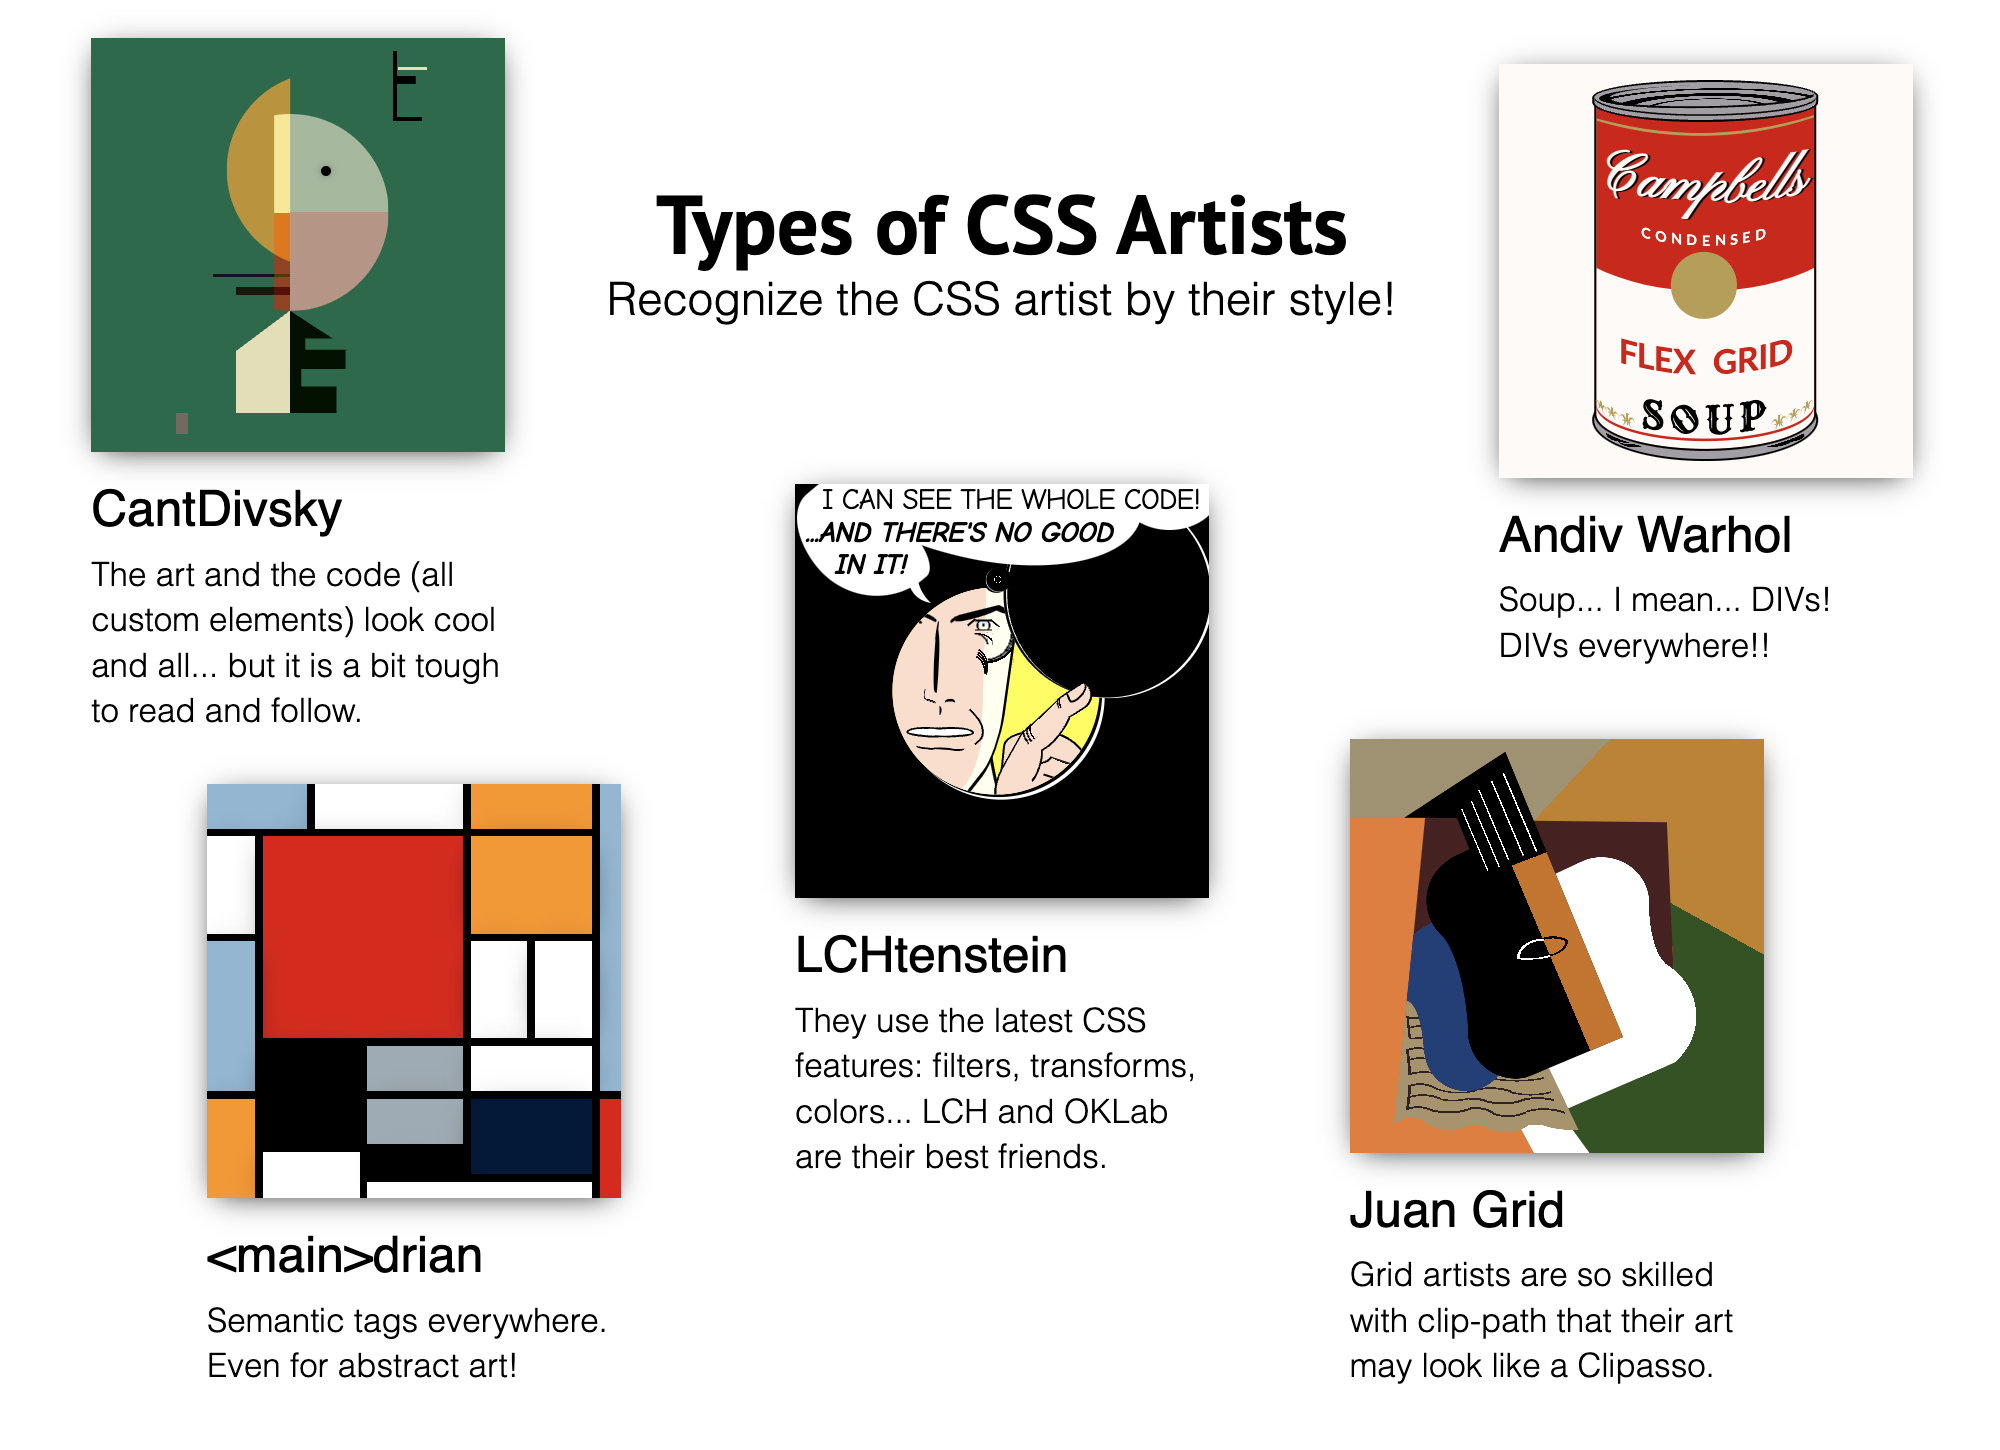 Recognize the CSS artist by their style!